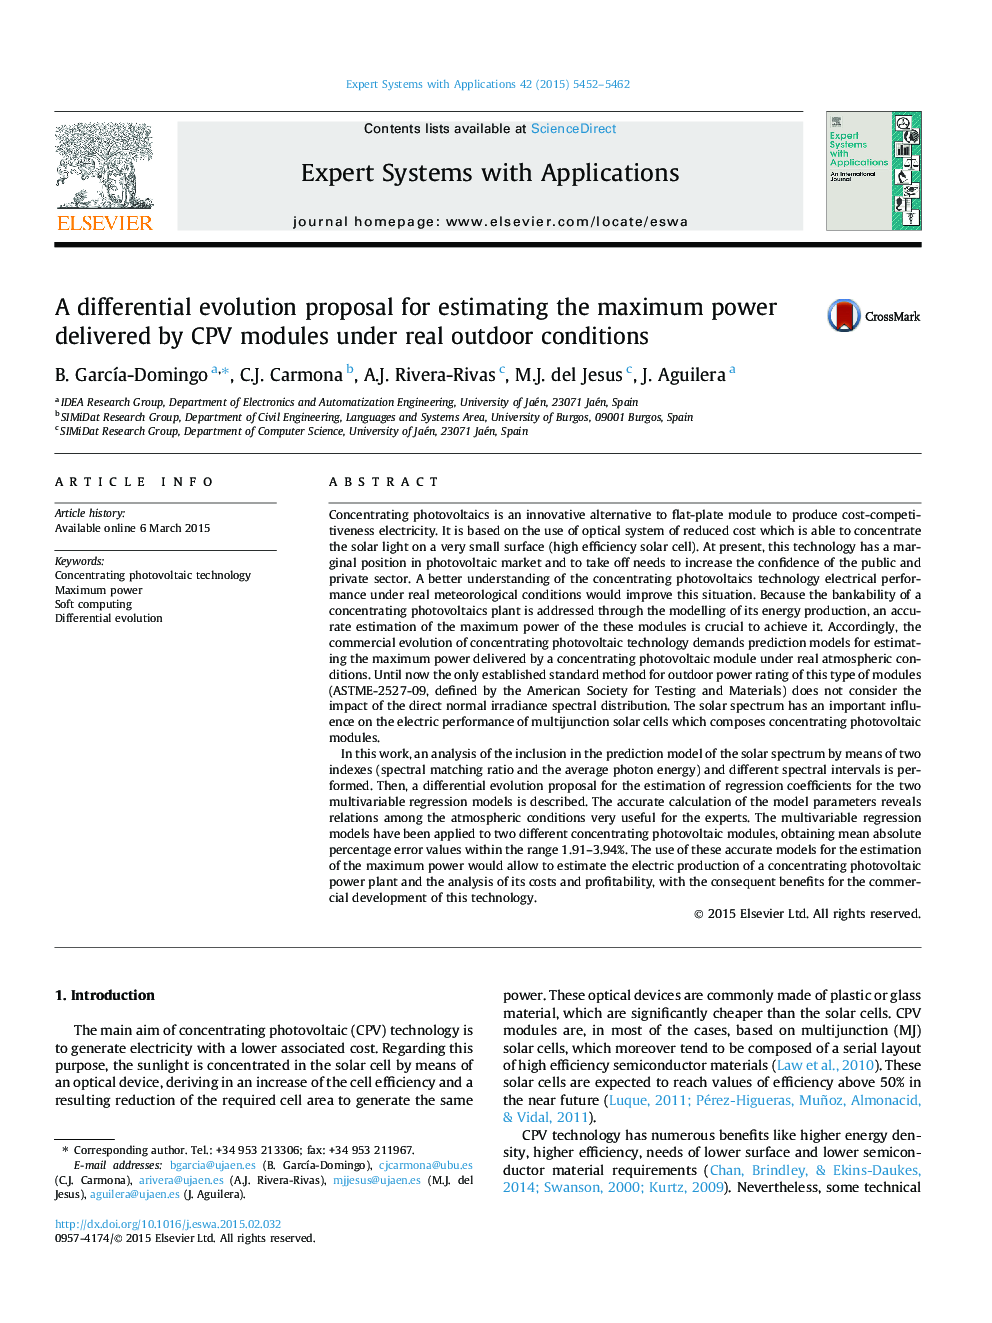 A differential evolution proposal for estimating the maximum power delivered by CPV modules under real outdoor conditions